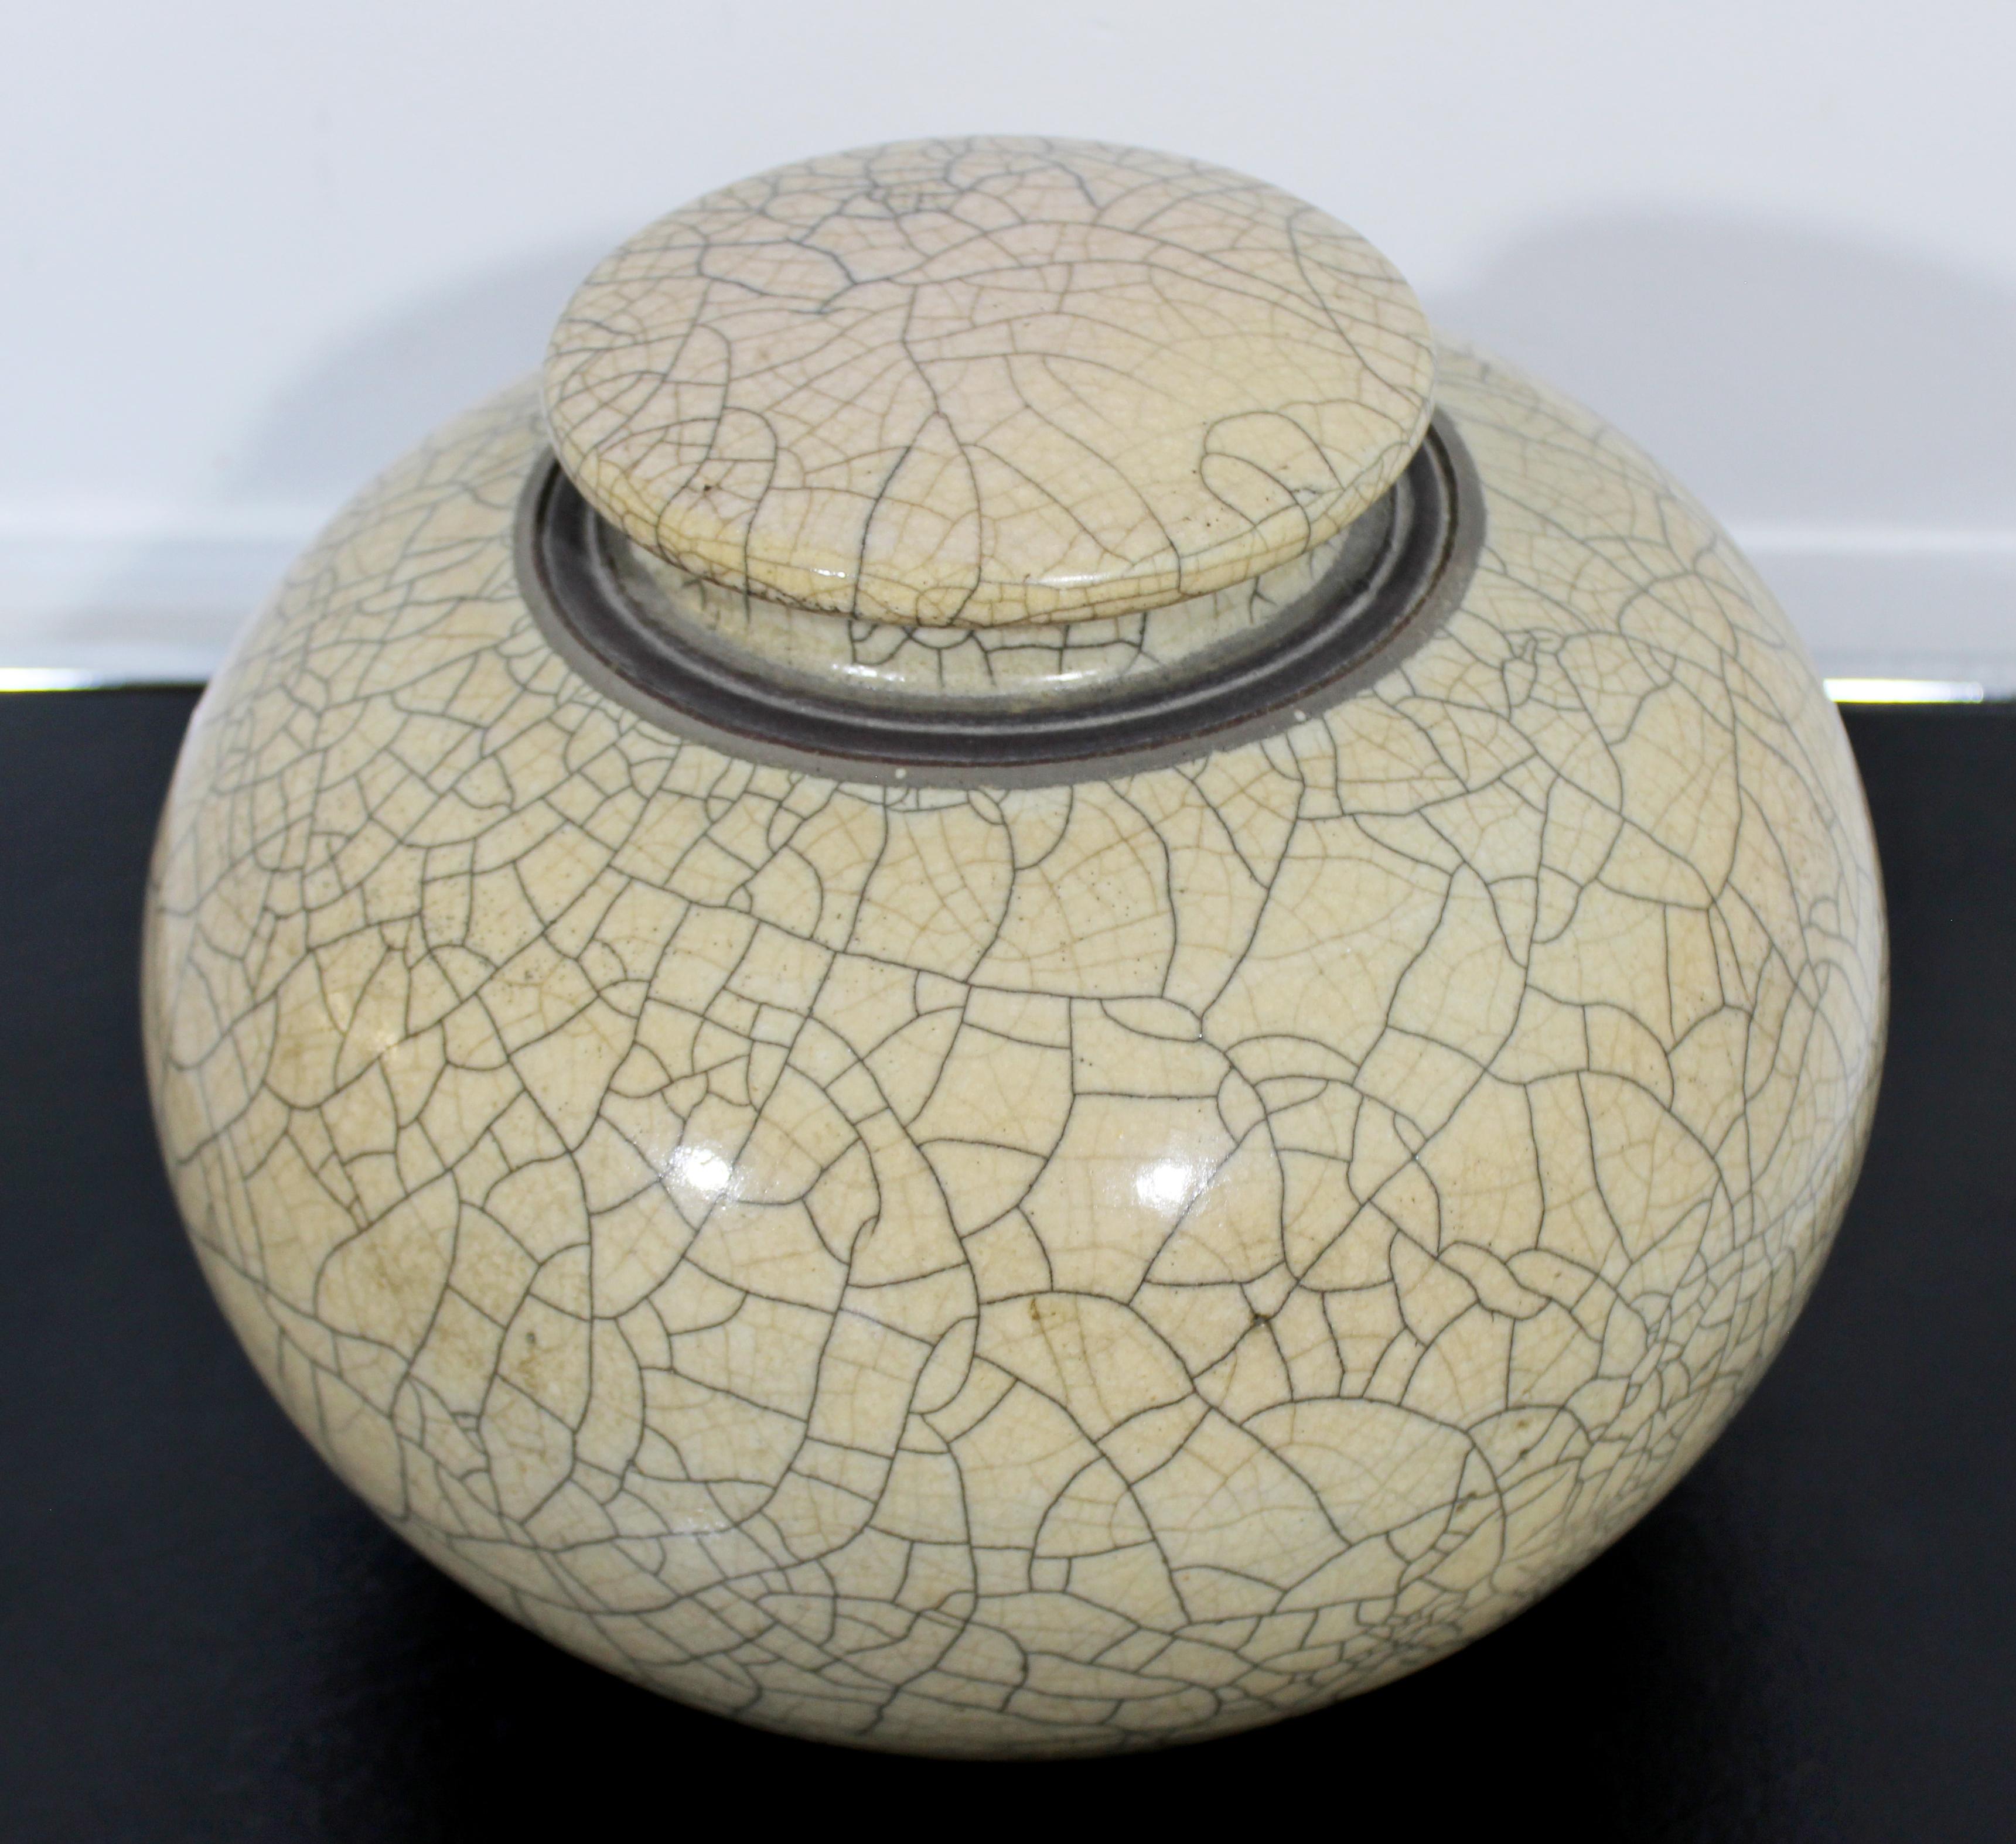 For your consideration is a stunning, Poplar studio ceramic lidded vessel, signed by Dale Raddatz. Born in 1945 Raddatz is a well known sculptor and potter. He has extensive knowledge in both kiln and foundry design. In excellent condition. The